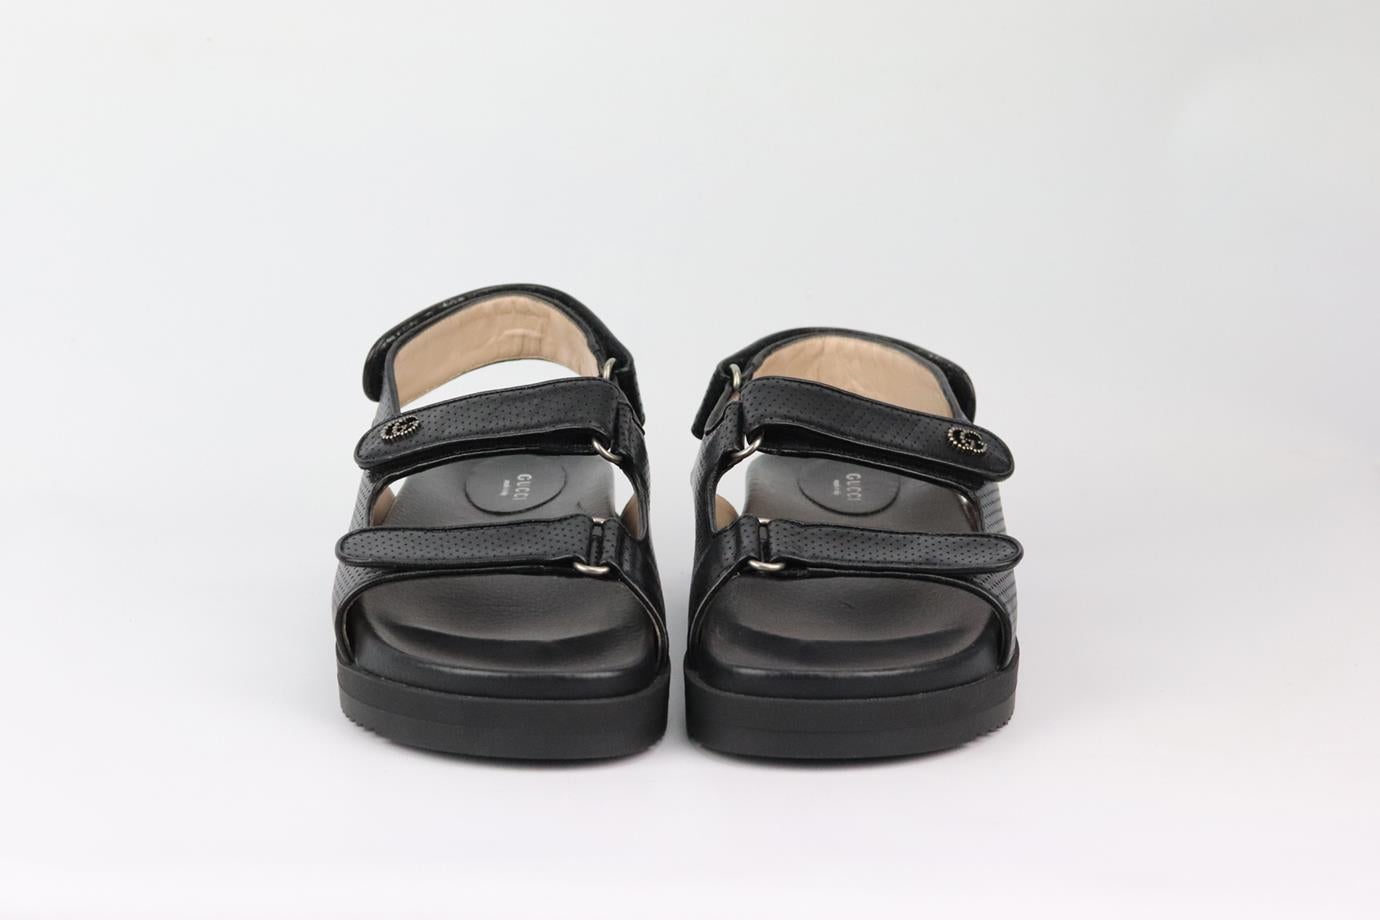 These ‘Dad’ sandals by Gucci have been made in Italy from glossy black perforated leather that's detailed with the label's emblem and have comfortable molded footbeds, the soles are gripped and chunky. Platform sole measures approximately 50 mm/ 2